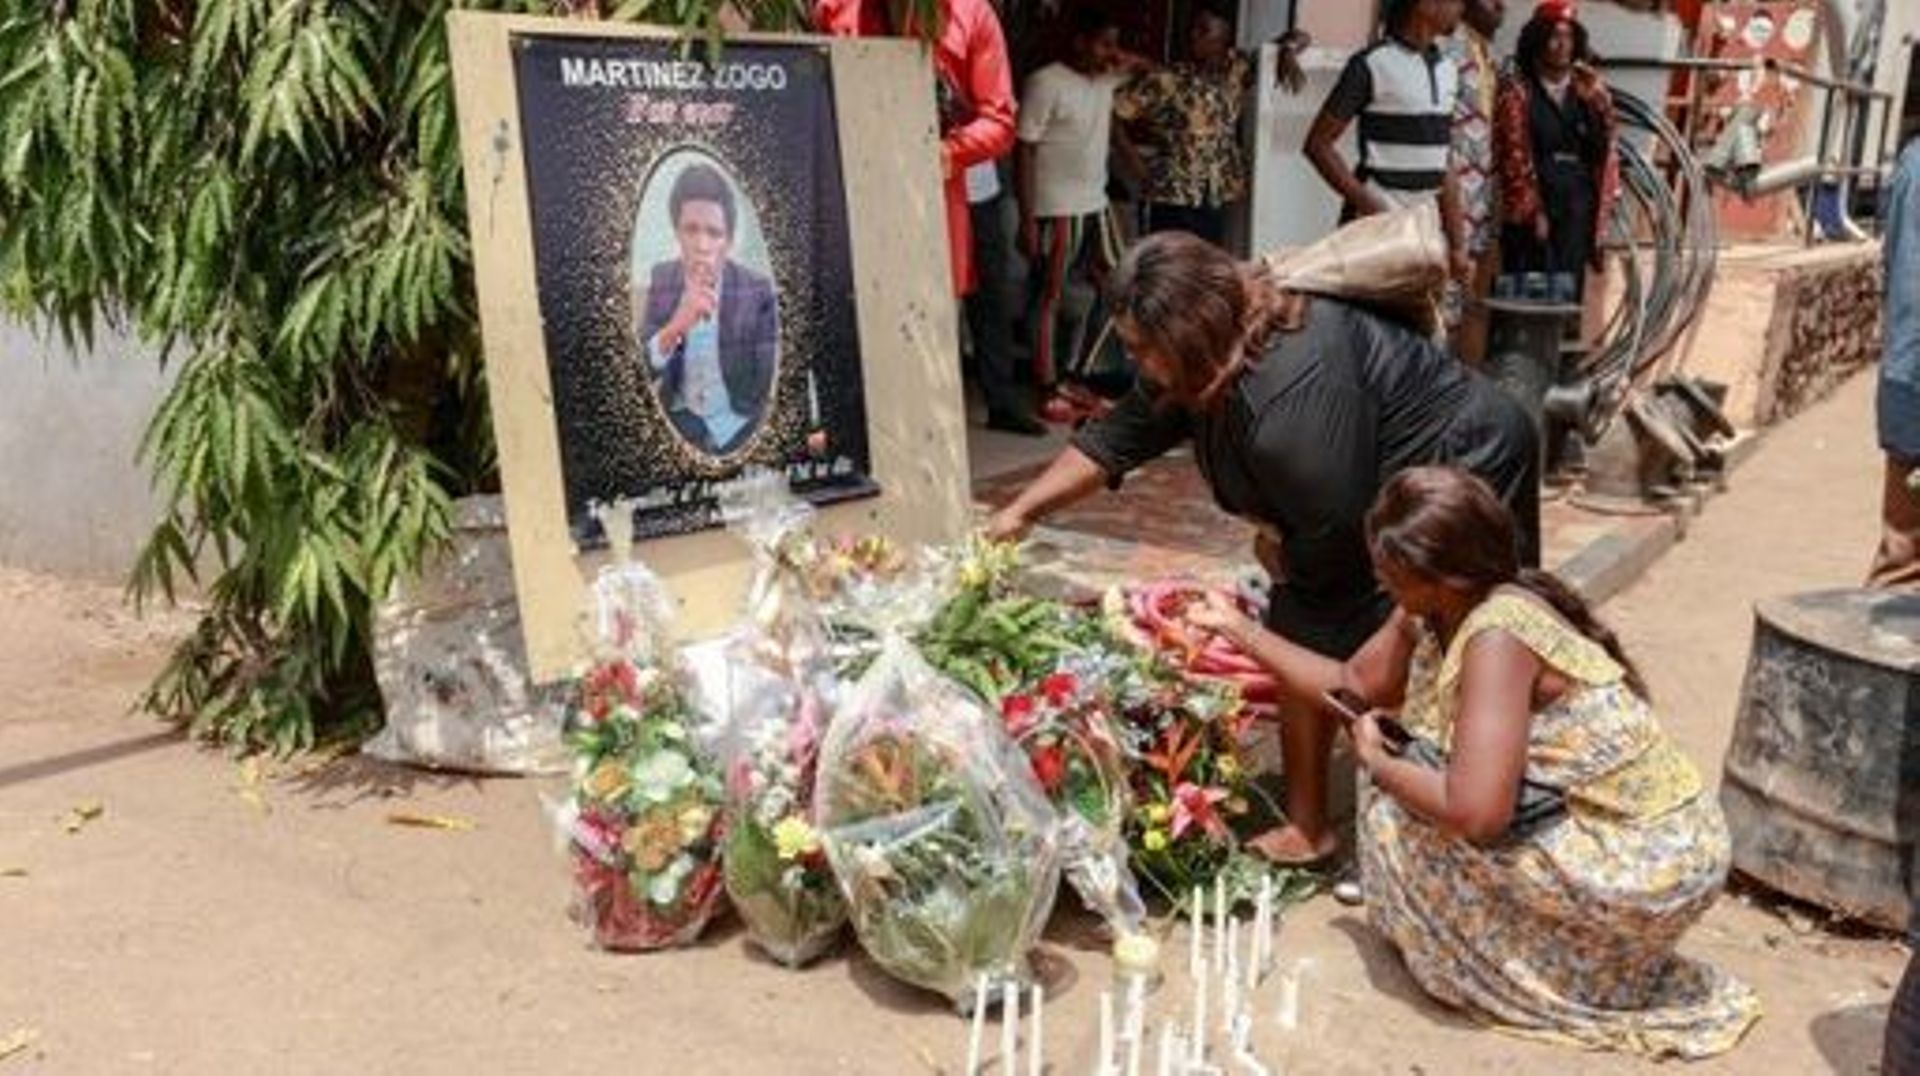 Mourners place a candles and flowers in the courtyard of Radio Amplitude FM, during a tribute ceremony for journalist Martinez Zogo, in the Elig Essono district of Yaounde on January 23, 2023. A popular Cameroon radio journalist who had been missing follo